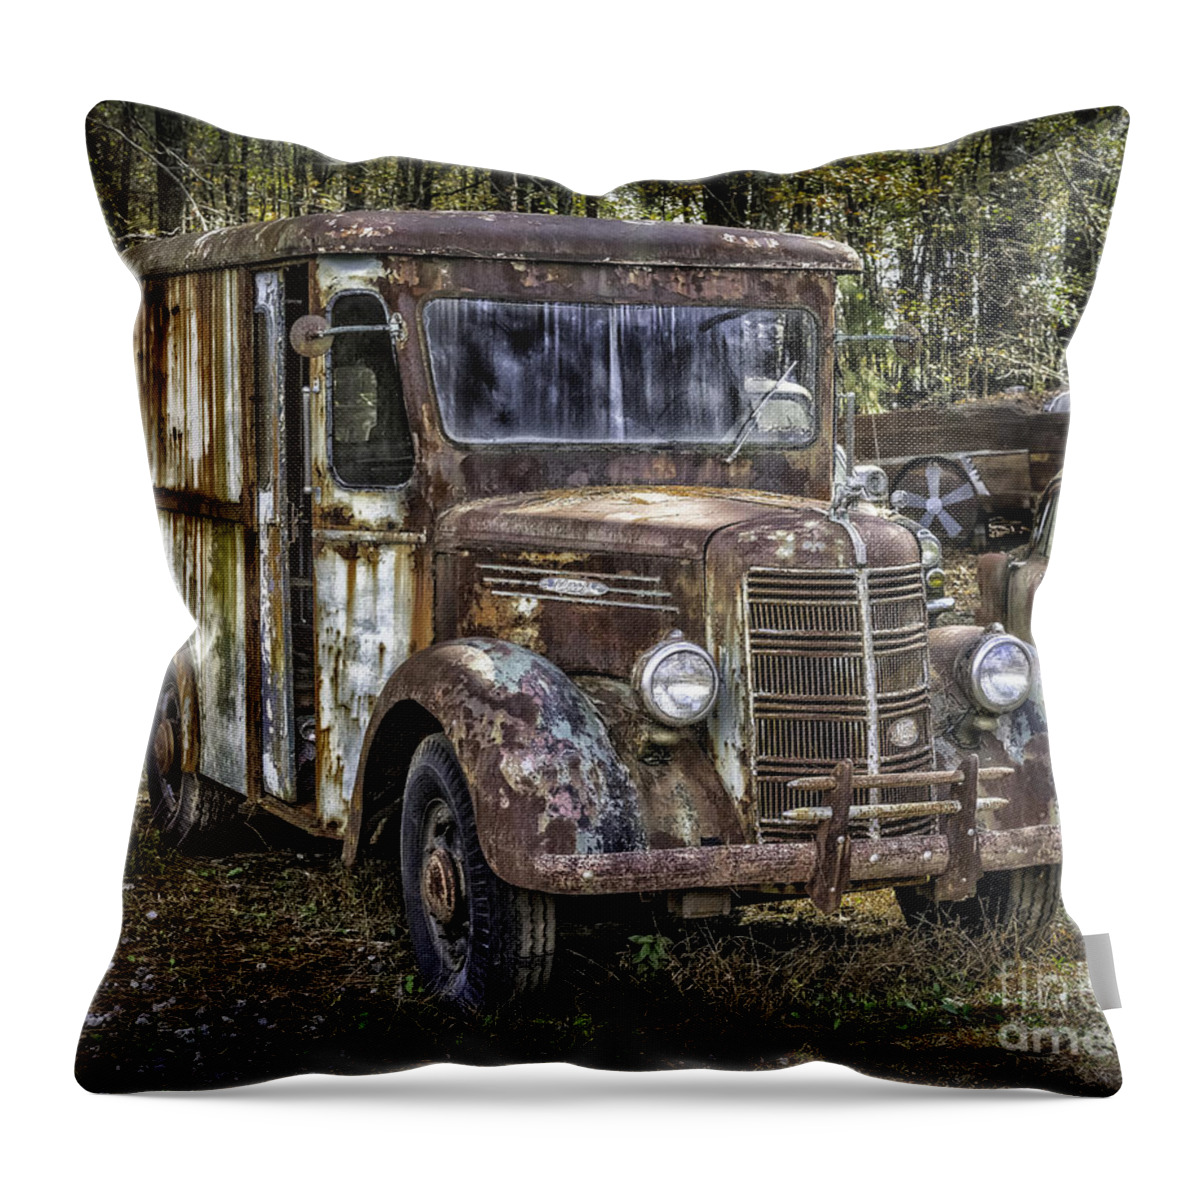 Mack Throw Pillow featuring the photograph Very Old Mack Truck by Walt Foegelle